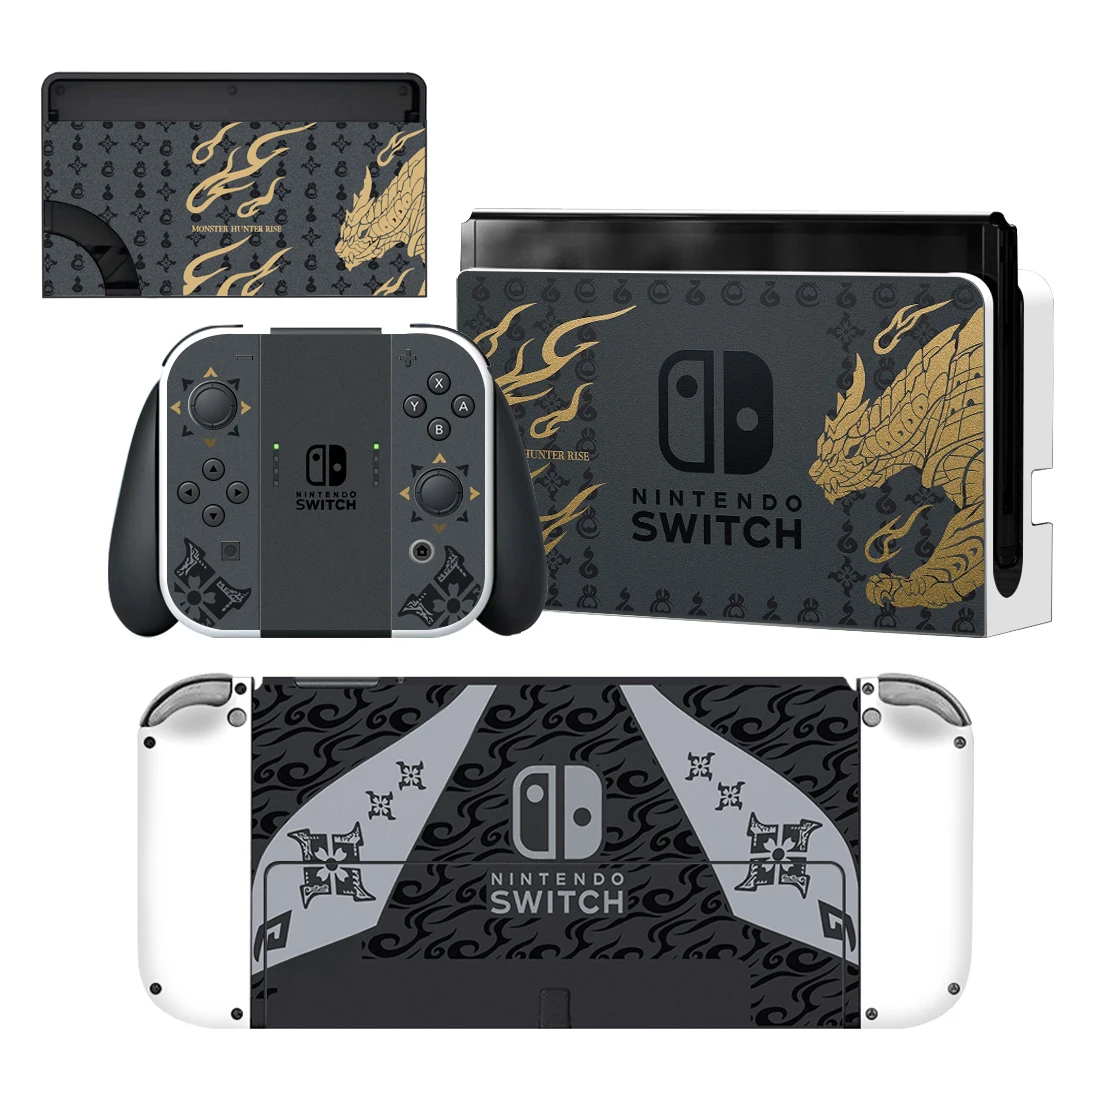 

Monster Hunter Rise Nintendoswitch Skin Cover Sticker Decal for Nintendo Switch OLED Console Joy-con Controller Dock Vinyl